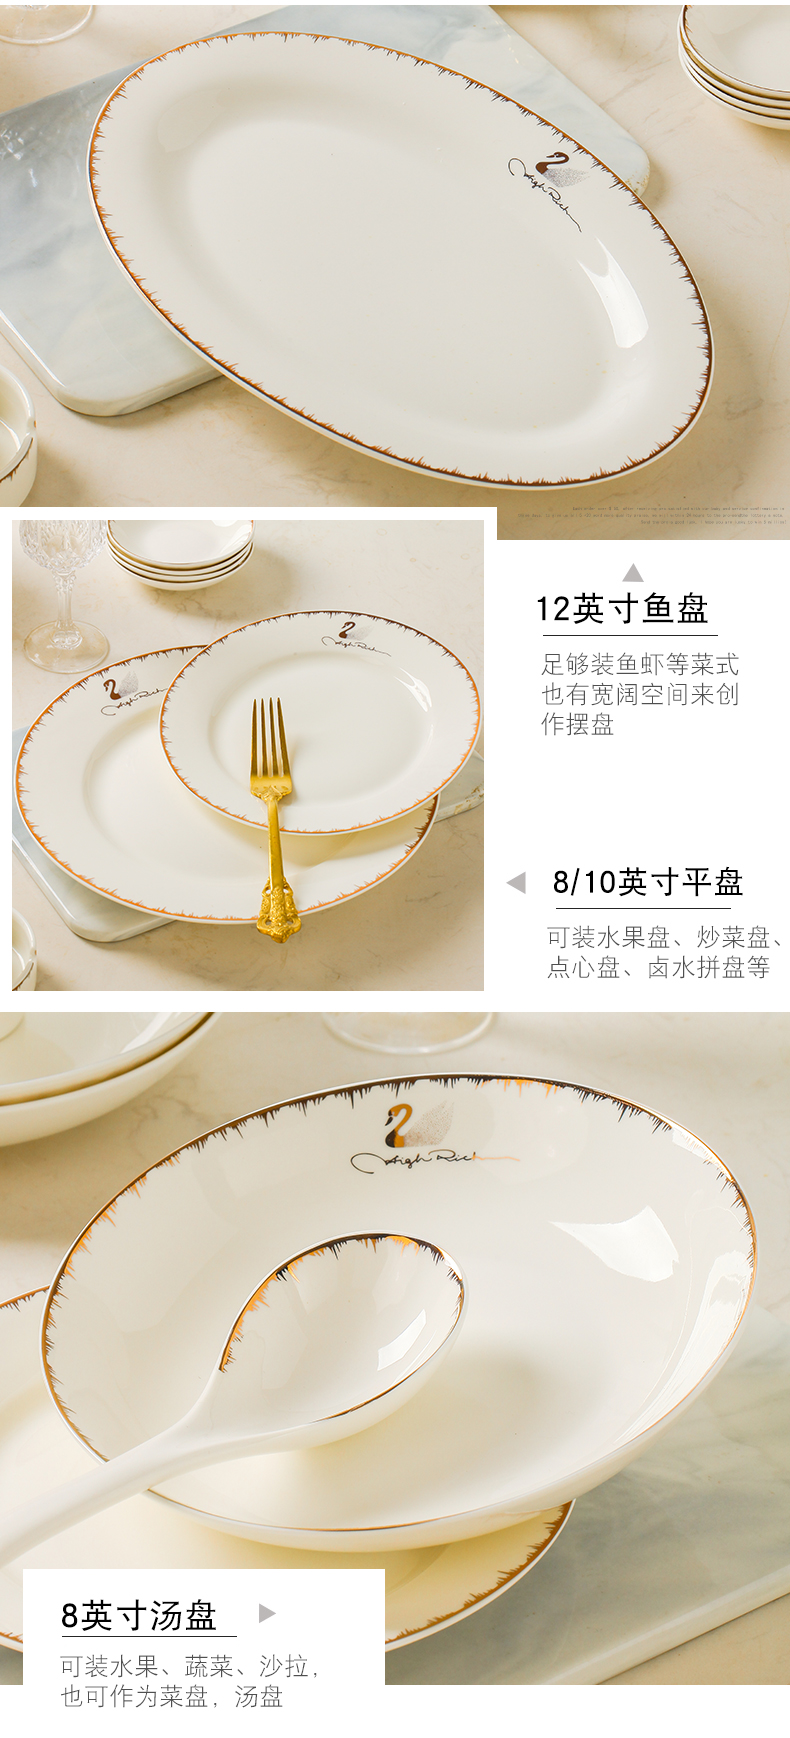 Jingdezhen domestic ipads porcelain tableware dishes suit European ceramic dishes to eat bowl chopsticks gifts in up phnom penh